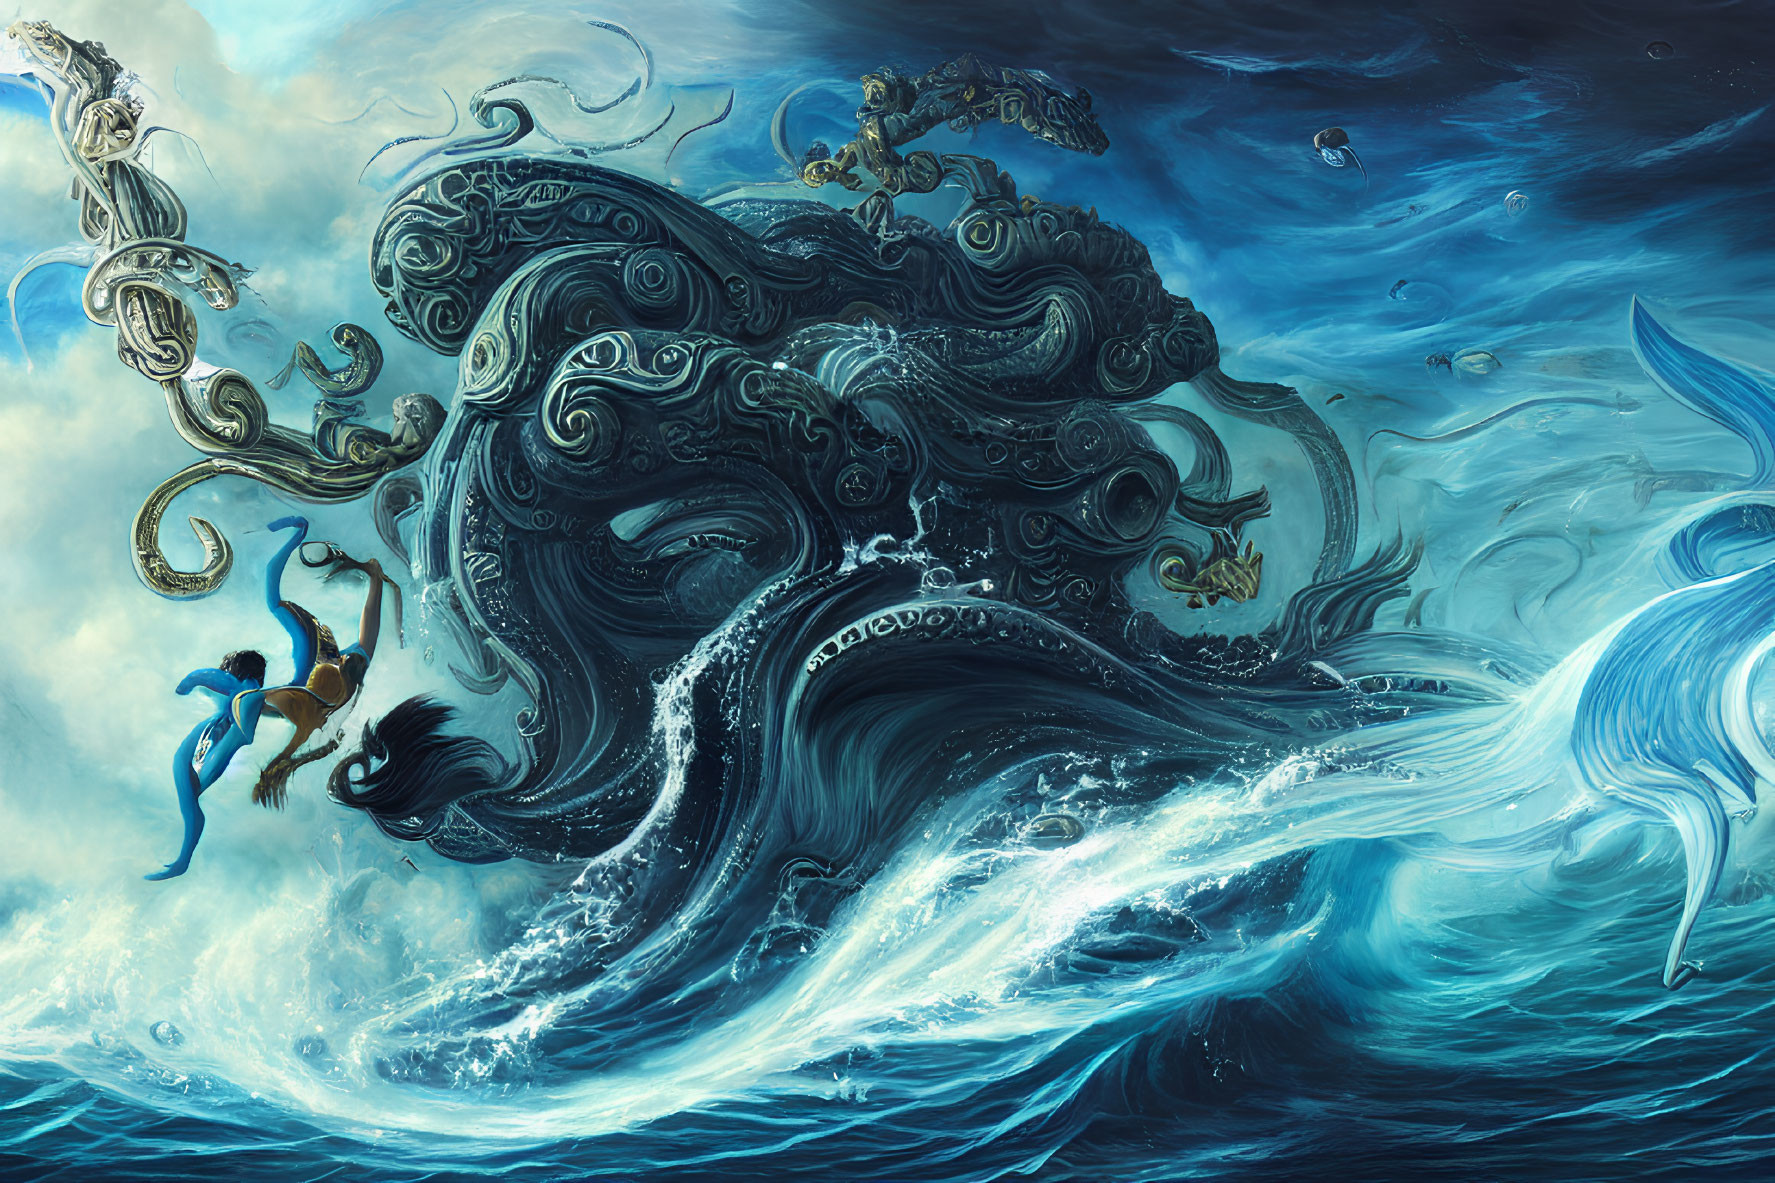 Fantastical underwater scene with merperson and ornate octopus.